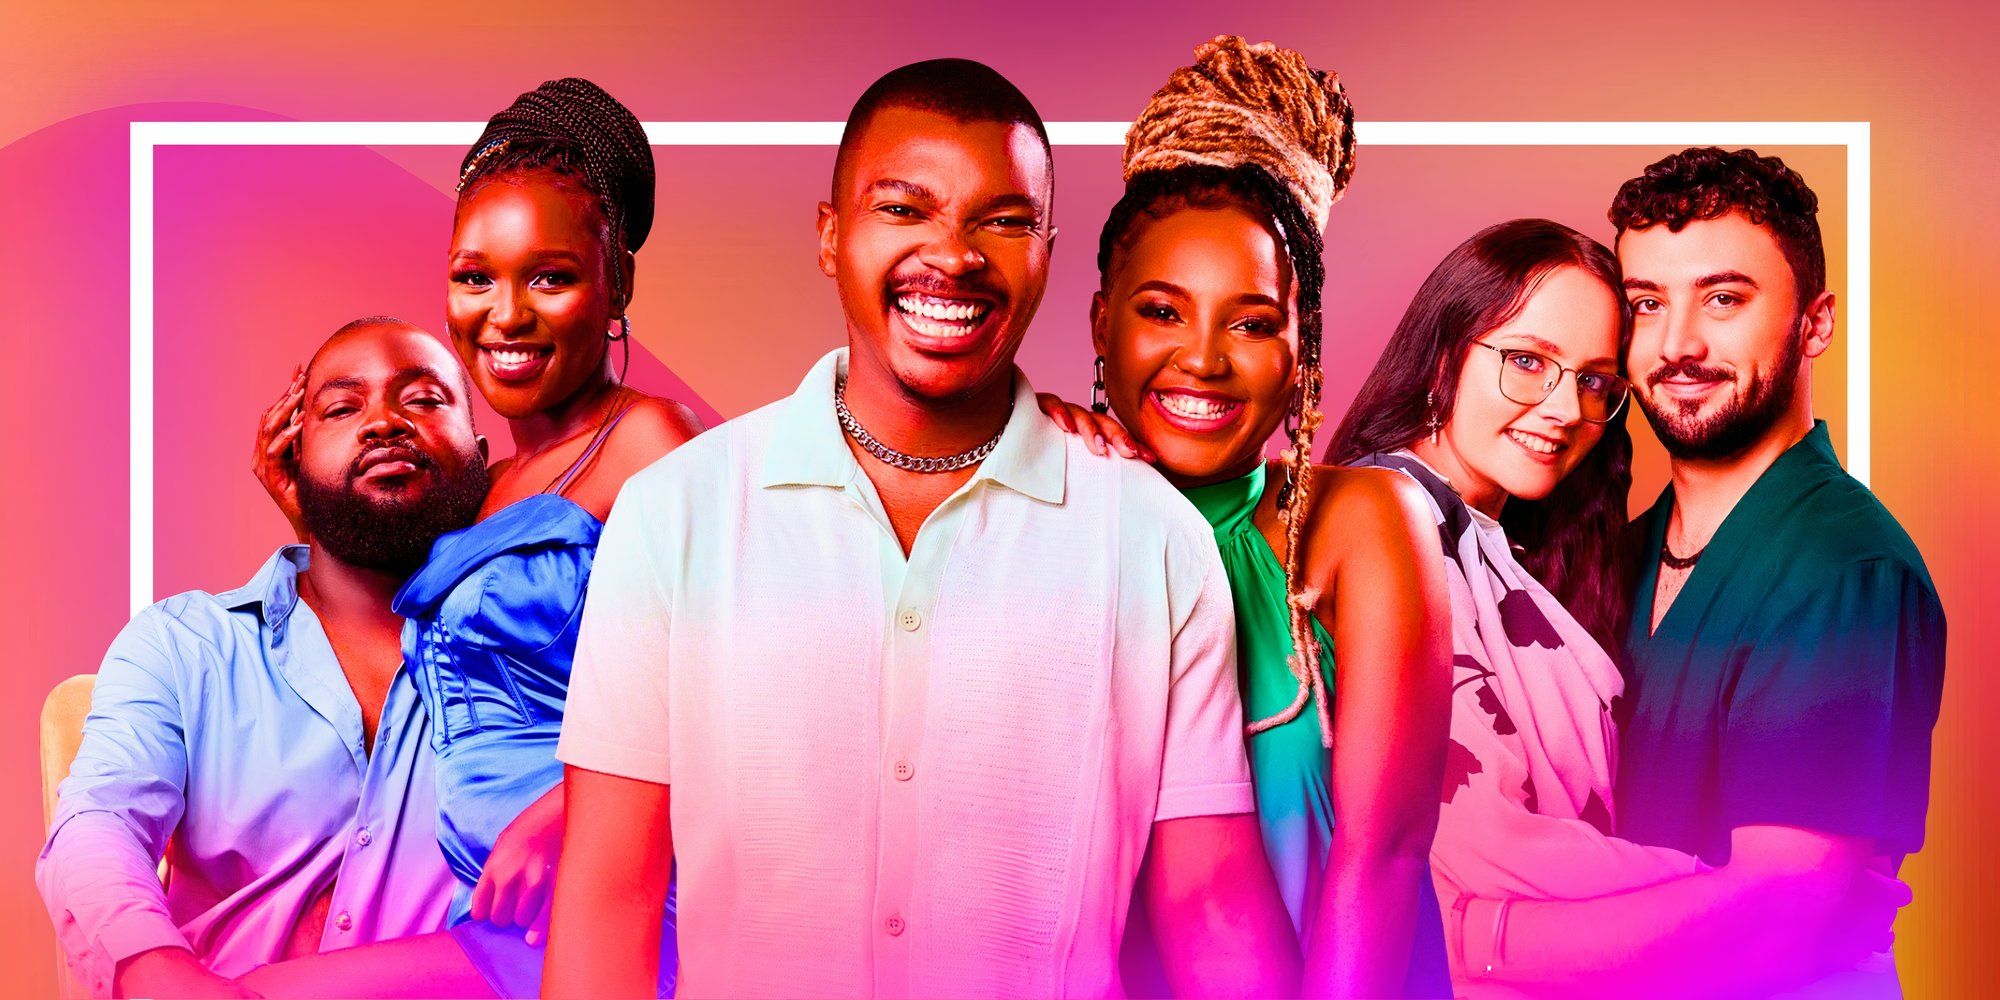 The Ultimatum South Africa Season 1 casts with Thabi & Genesis infront while Ruth & Isaac, Courtney & Aiden are at the back